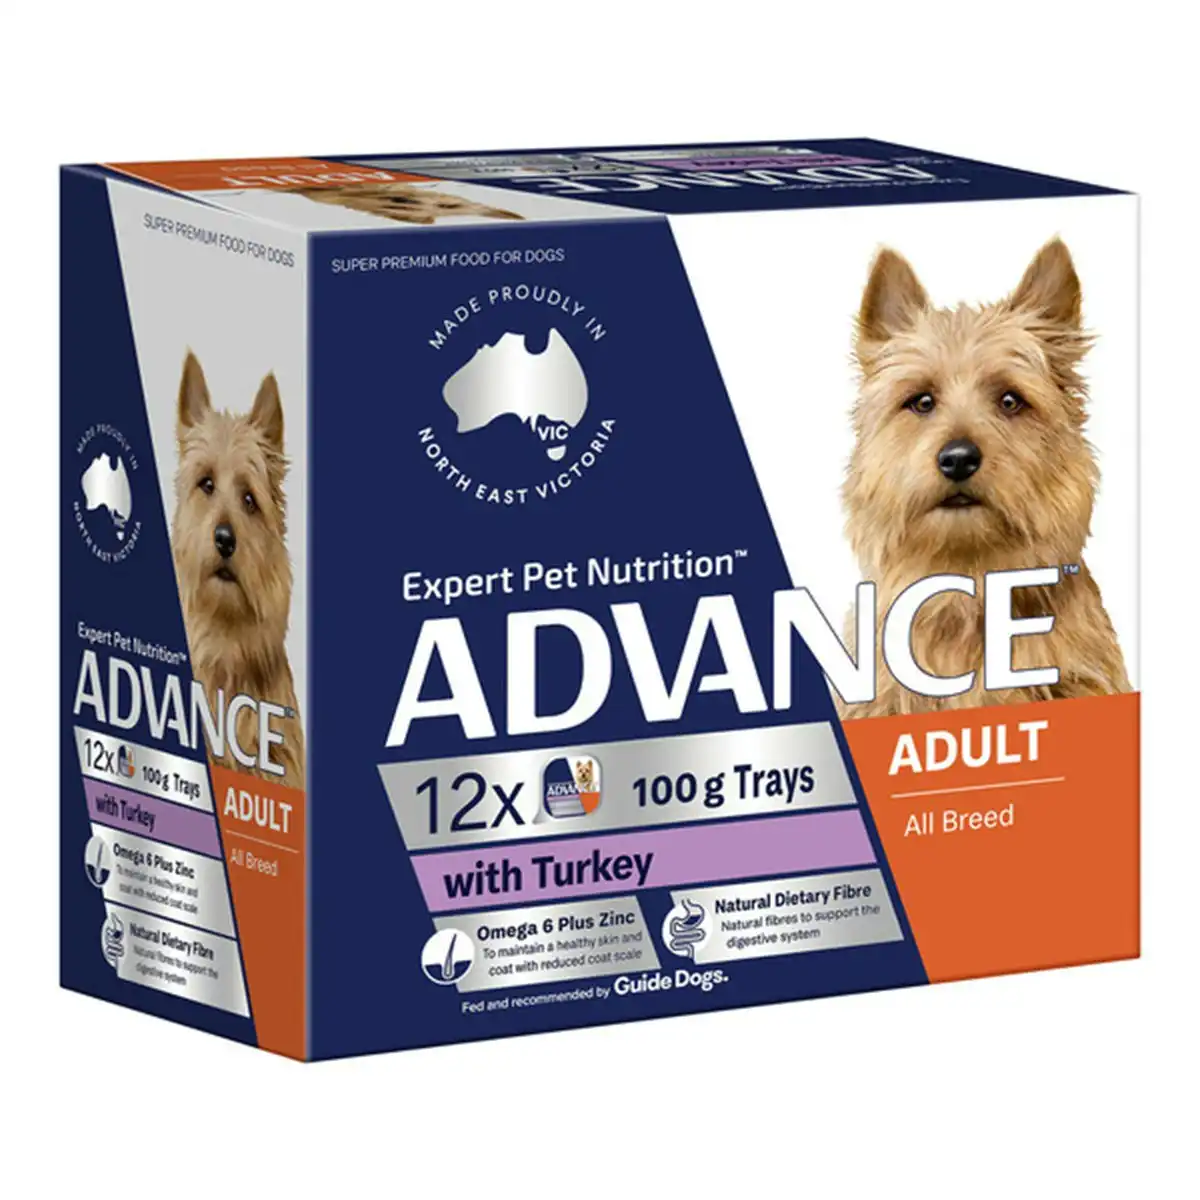 ADVANCE Adult All Breed Turkey Trays Wet Dog Food (100G*12) 1 Pack